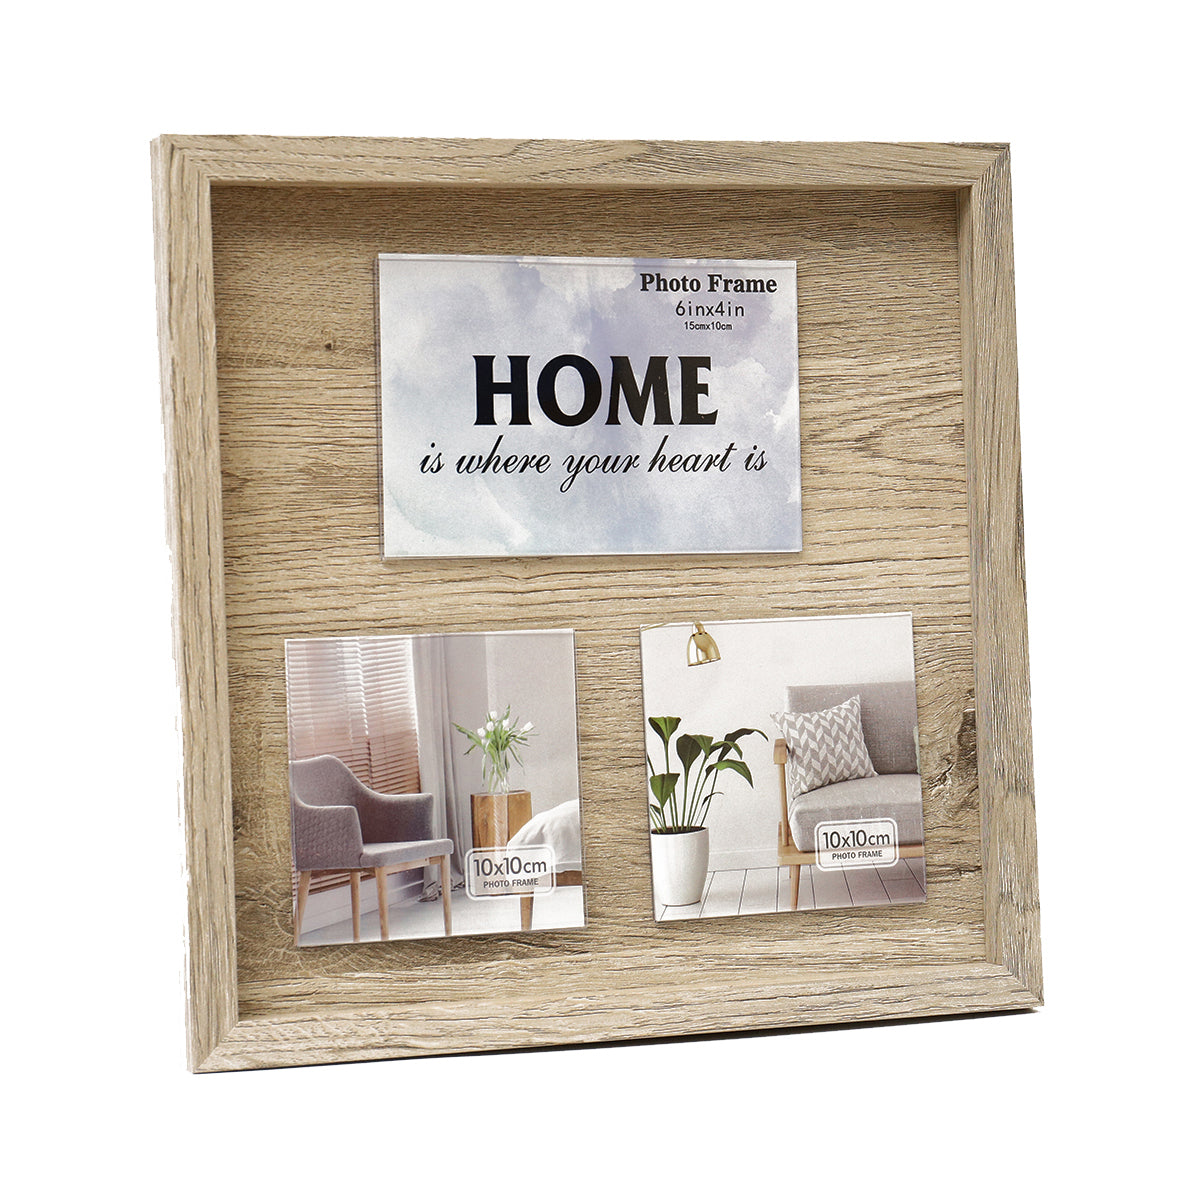 3-Display Collage Rustic Wooden Picture Frame (7574625190112)